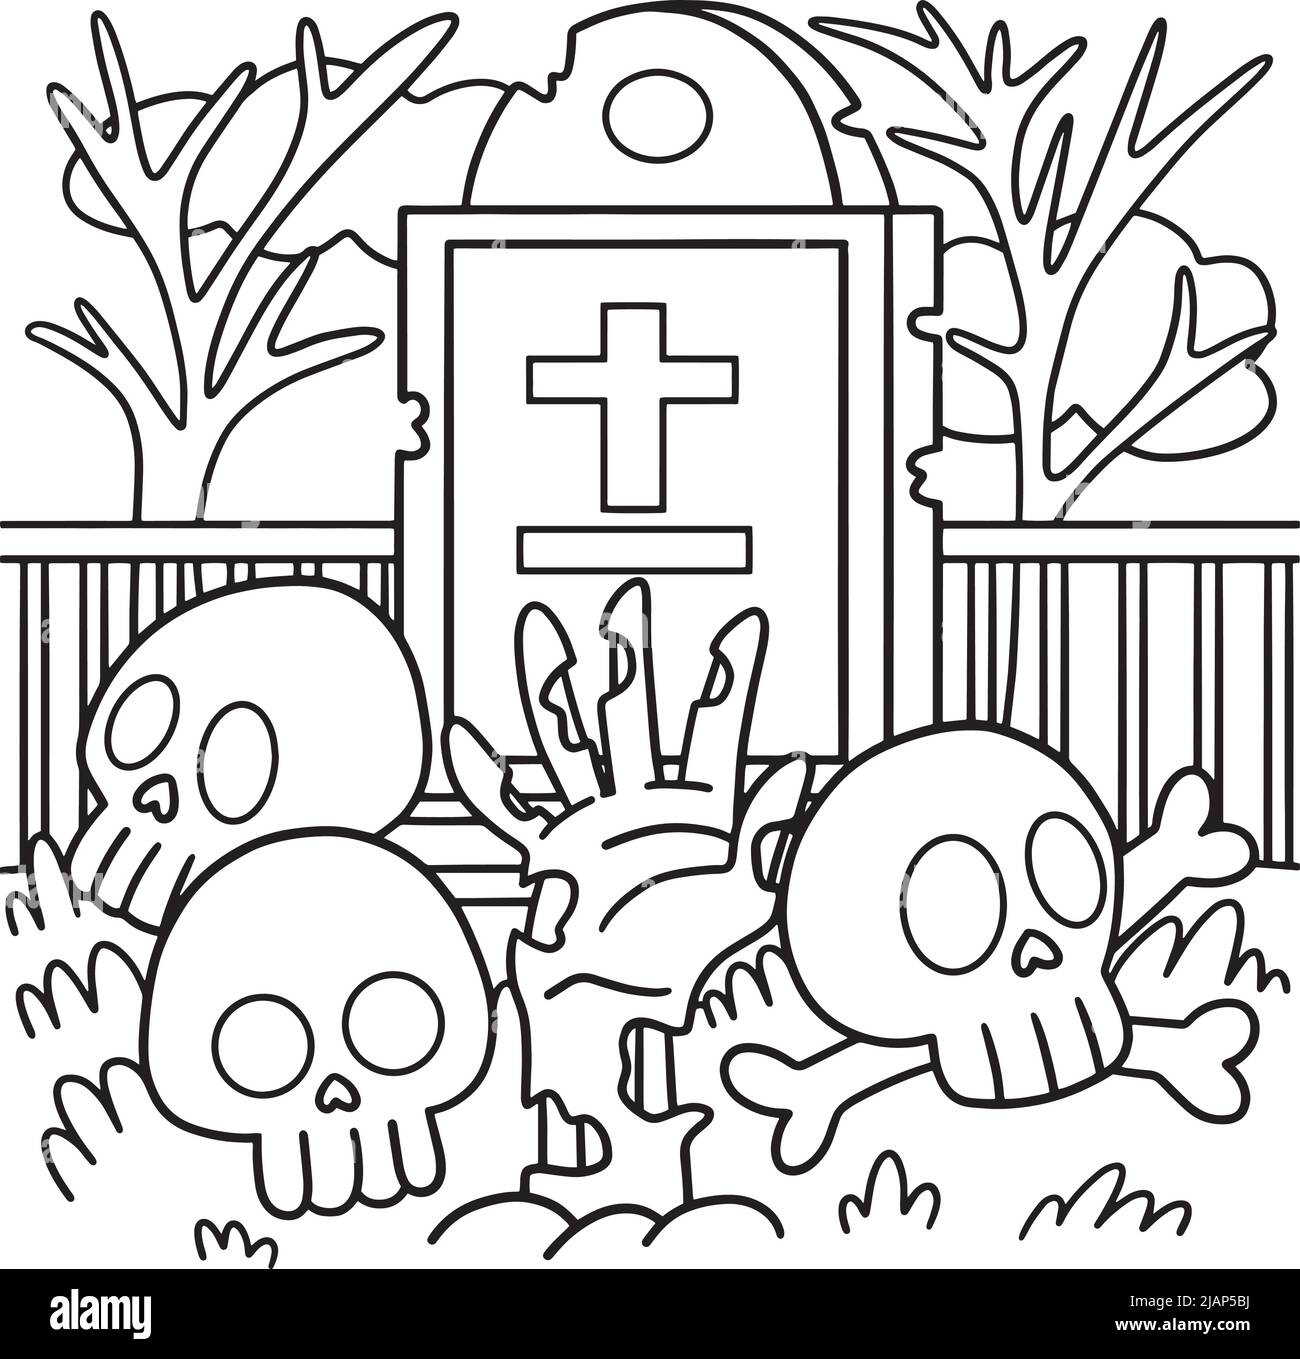 Skull halloween coloring page for kids stock vector image art